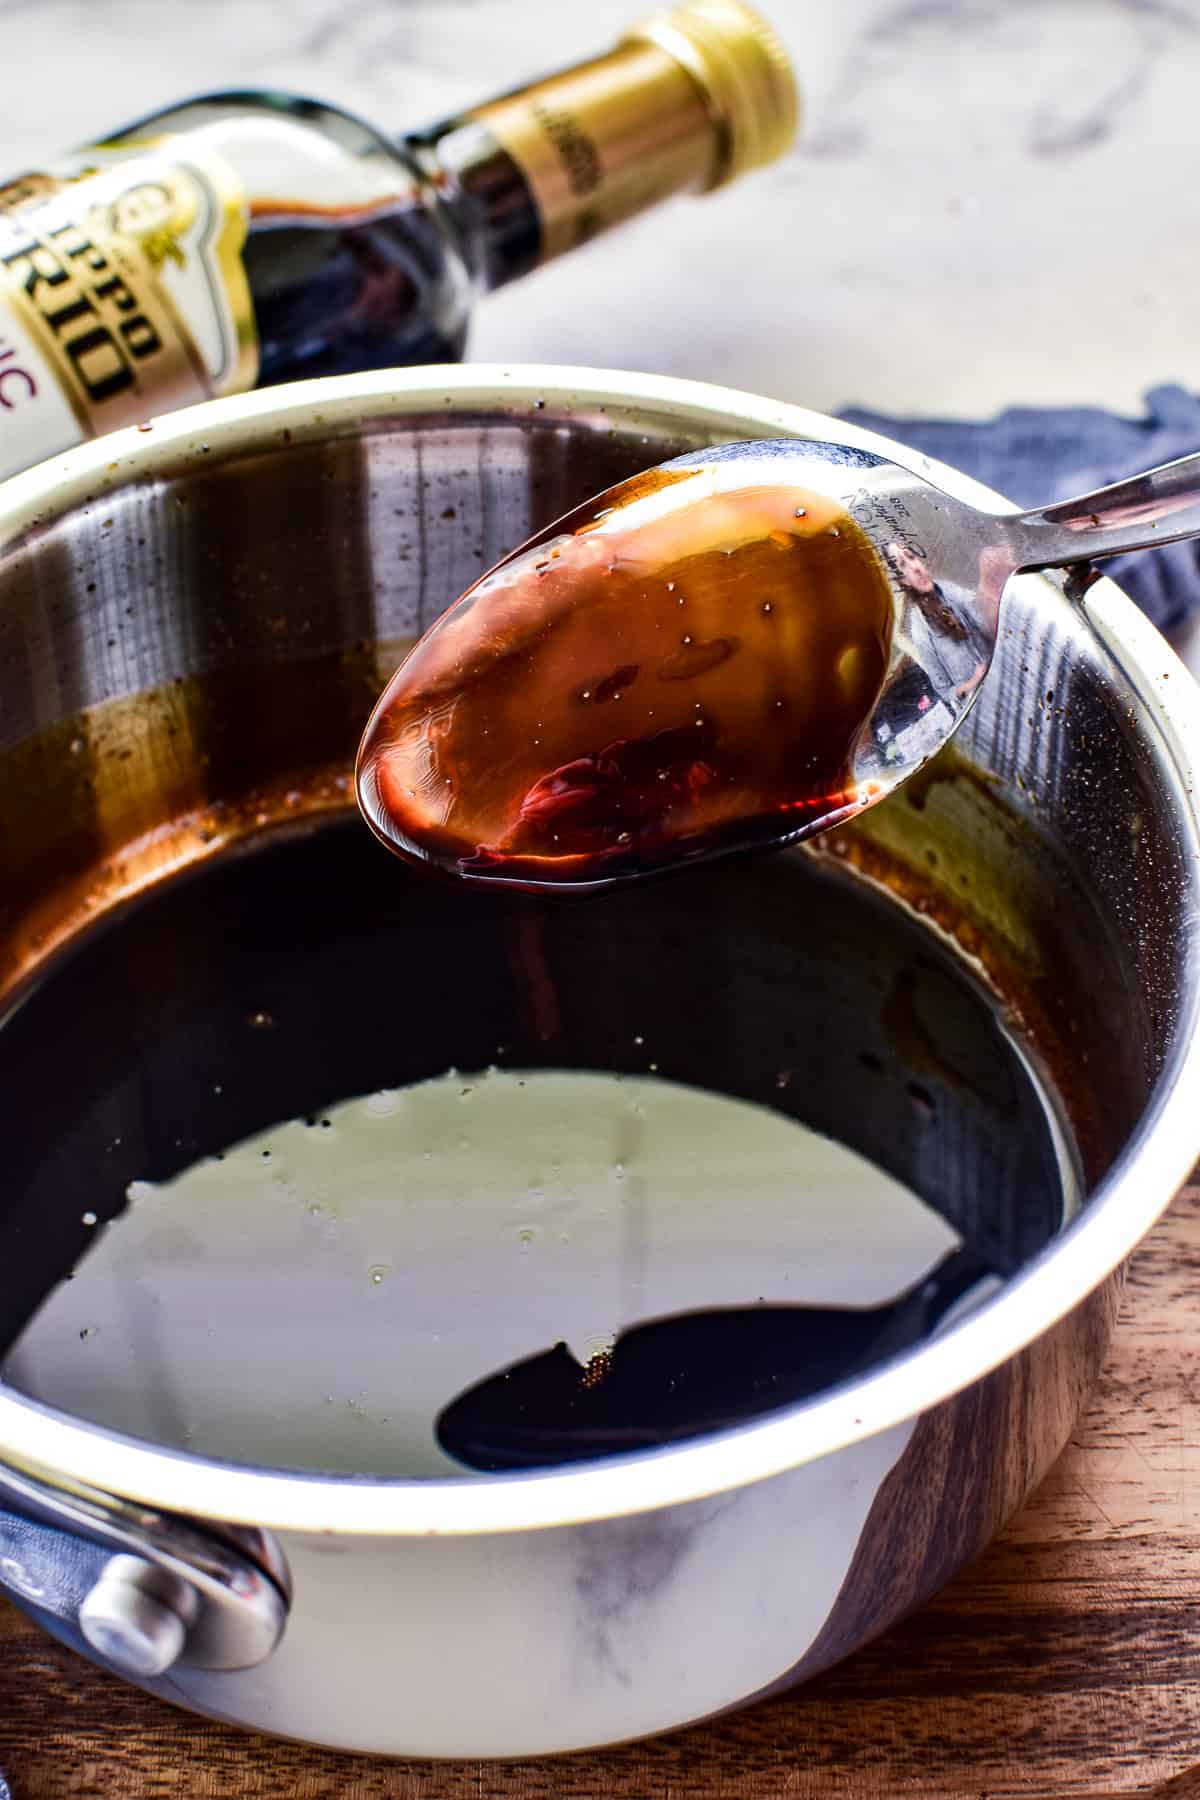 Balsamic glaze coating the back of a spoon